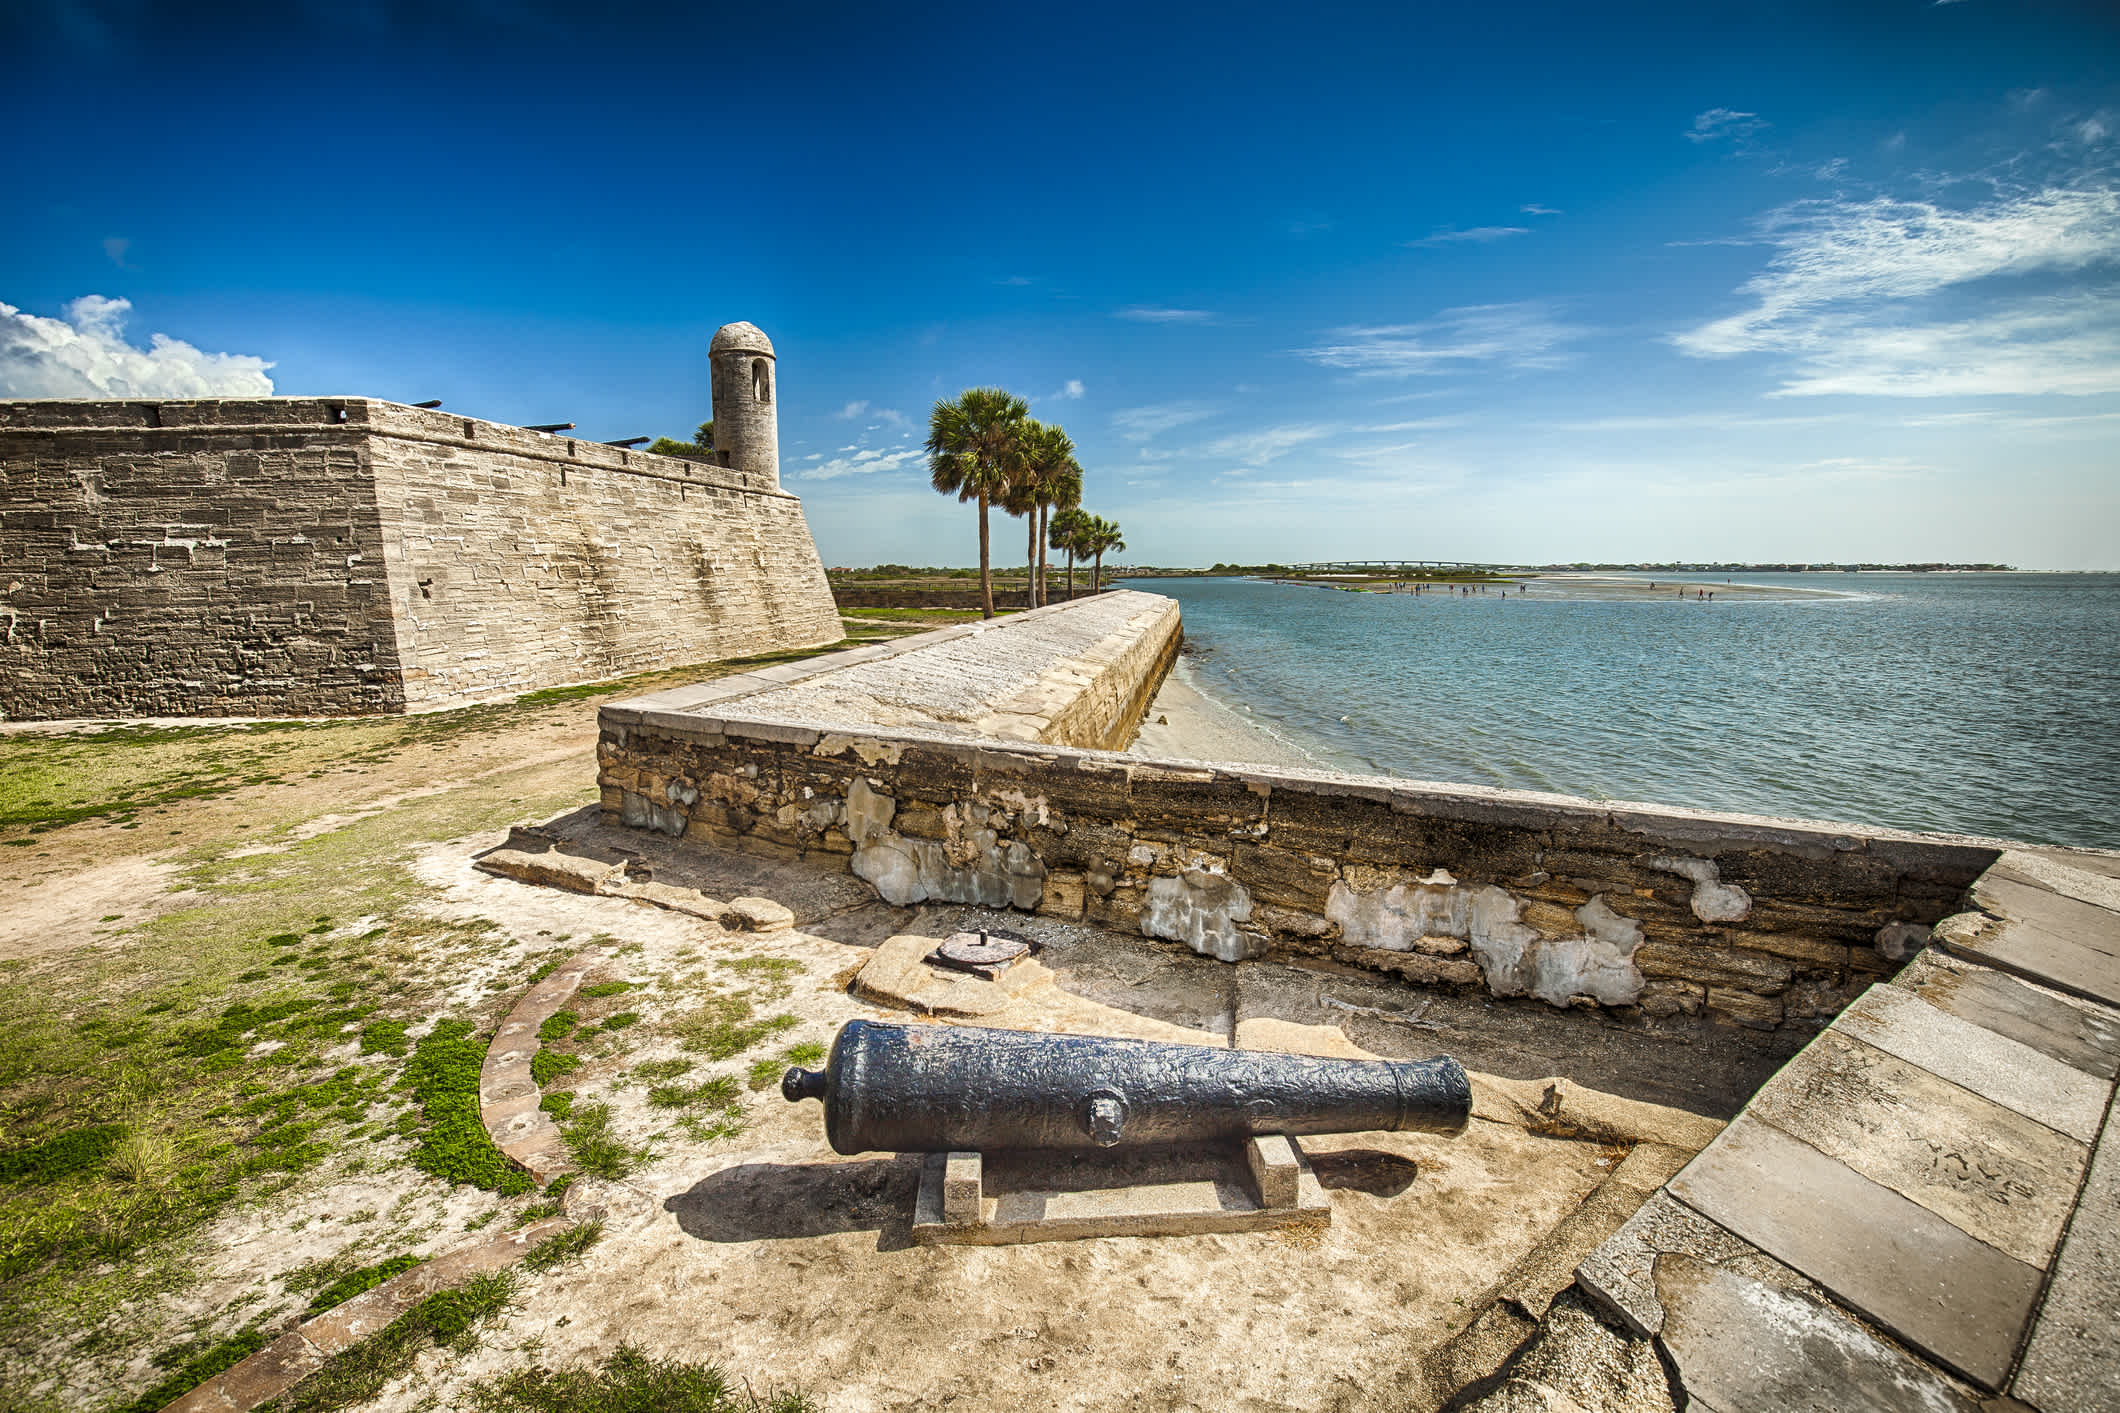 St. Augustine in Florida, USA